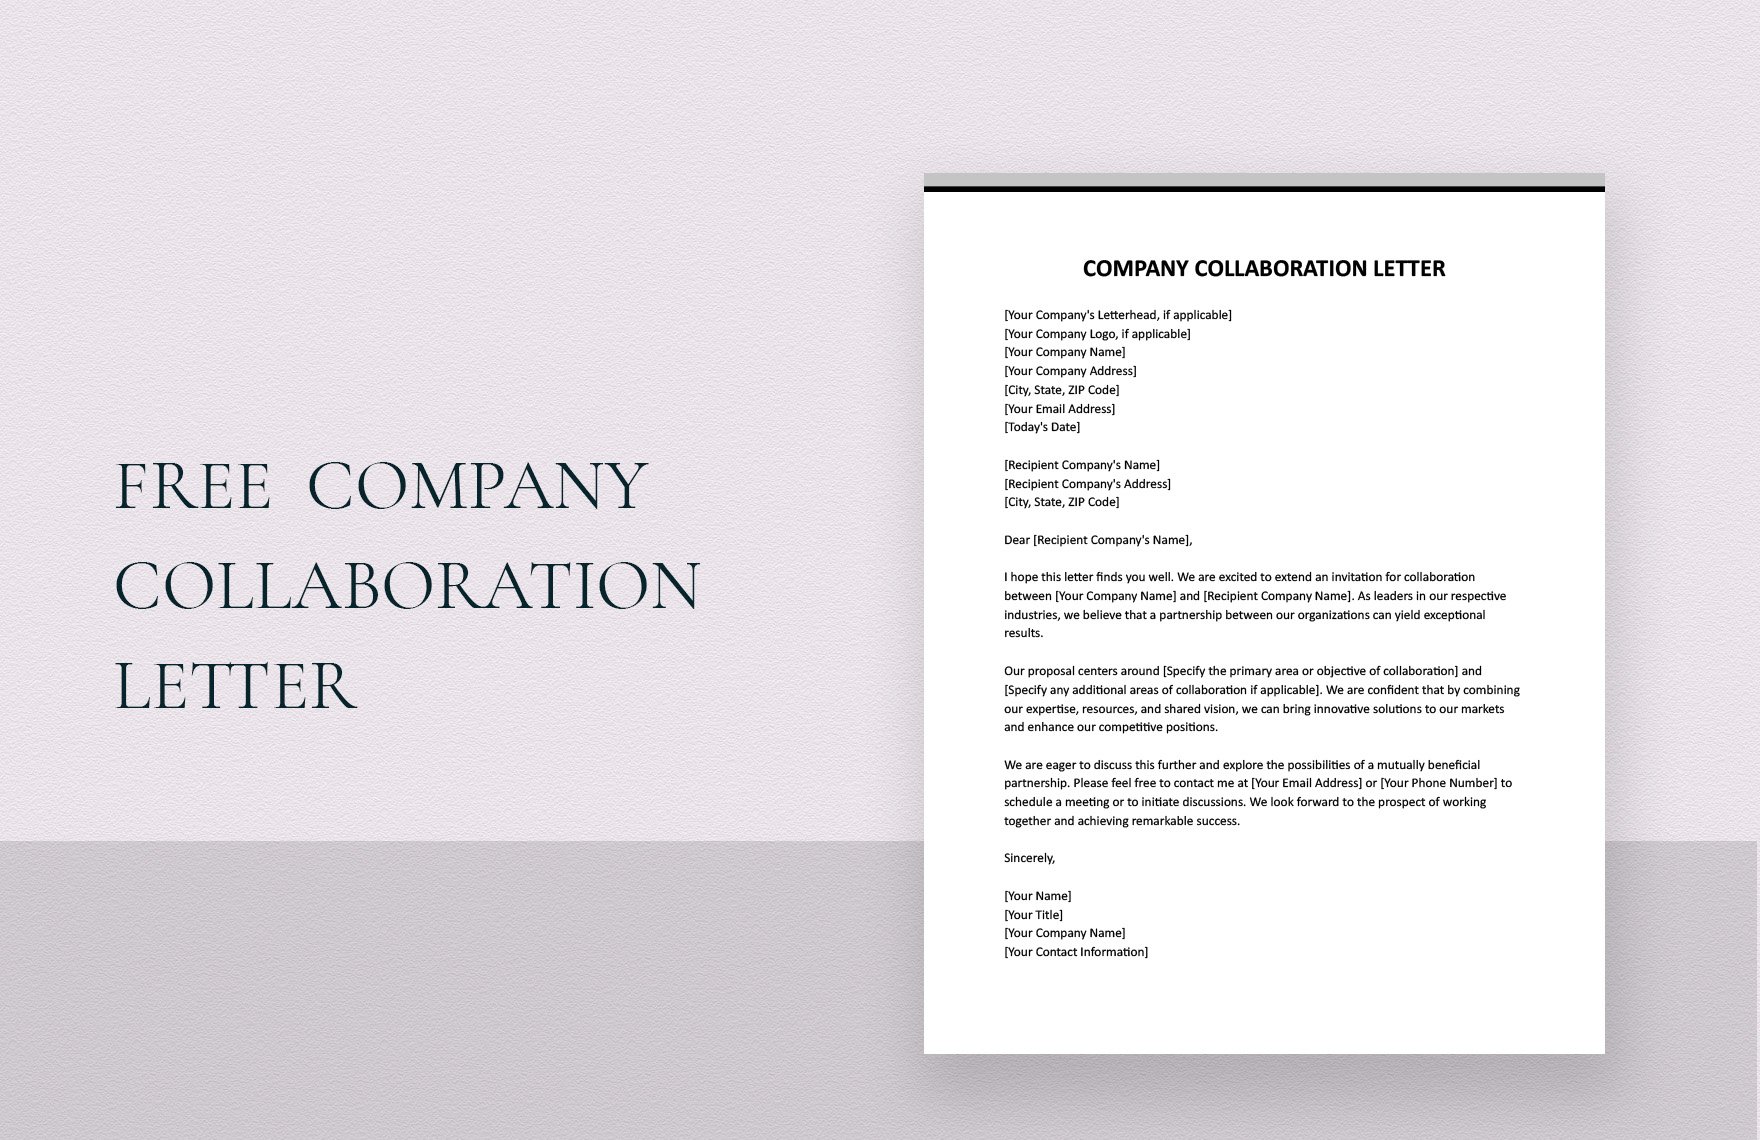 Company Collaboration Letter in Word, Google Docs